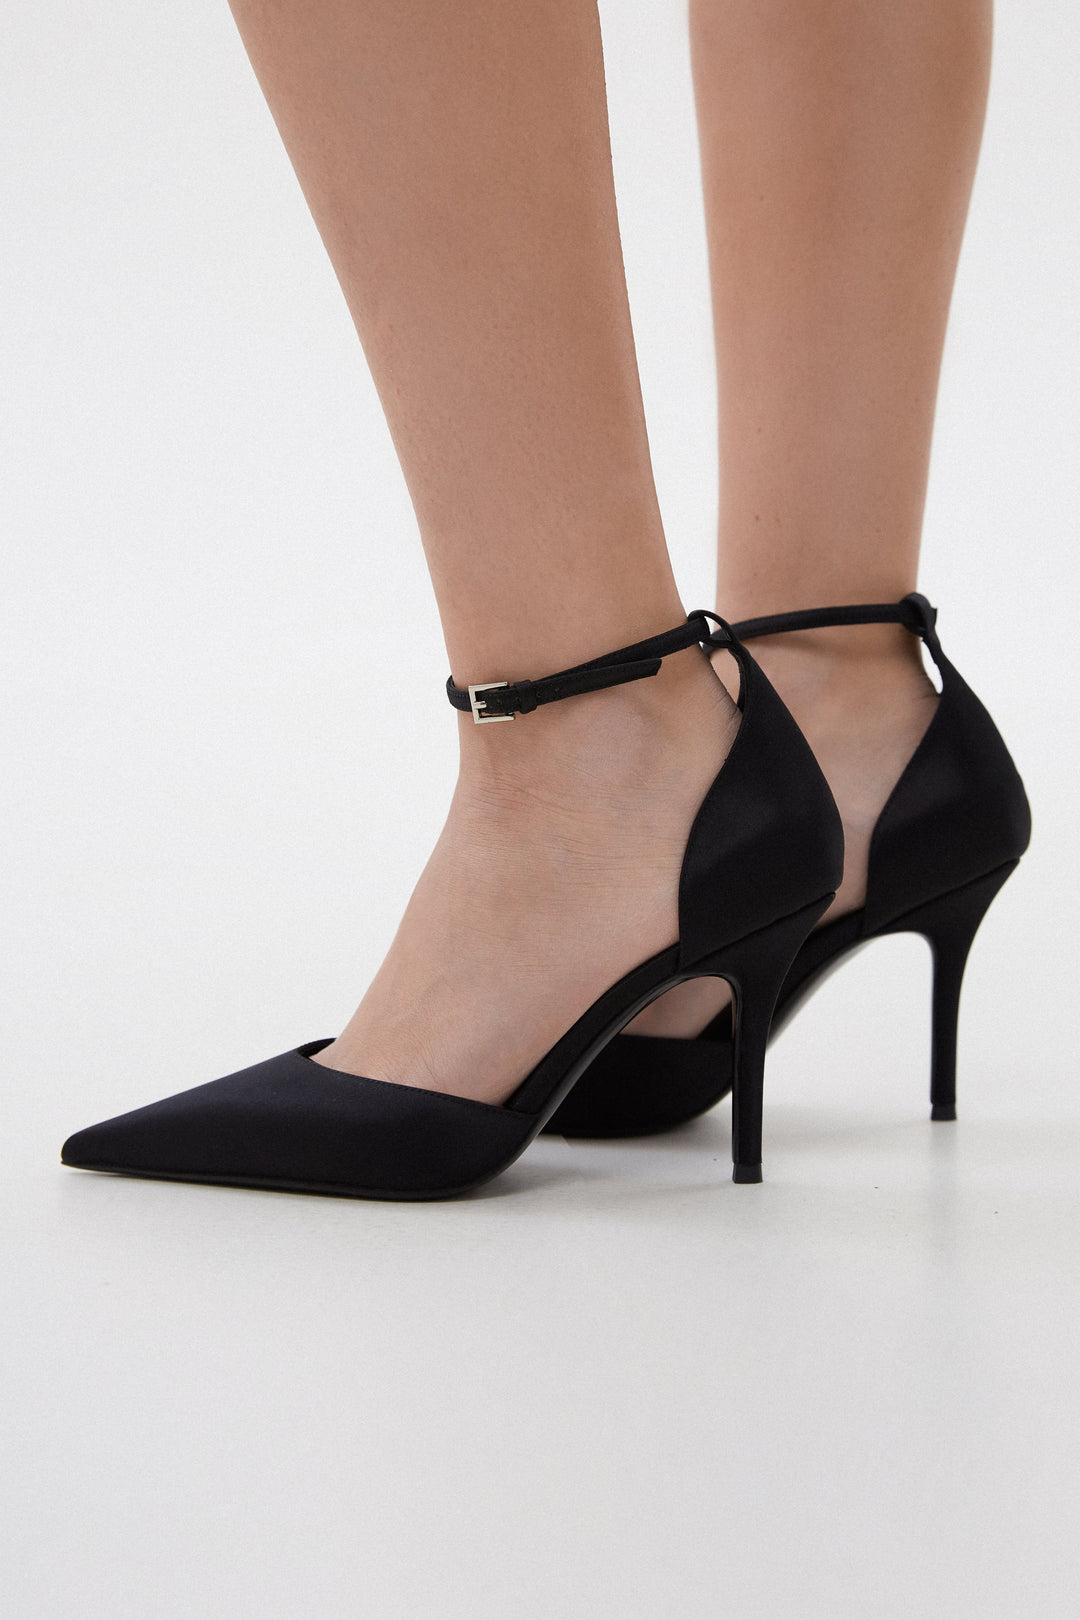 Women's black pointed toe pumps with crystals Estro x MustHave - presentation on a model.